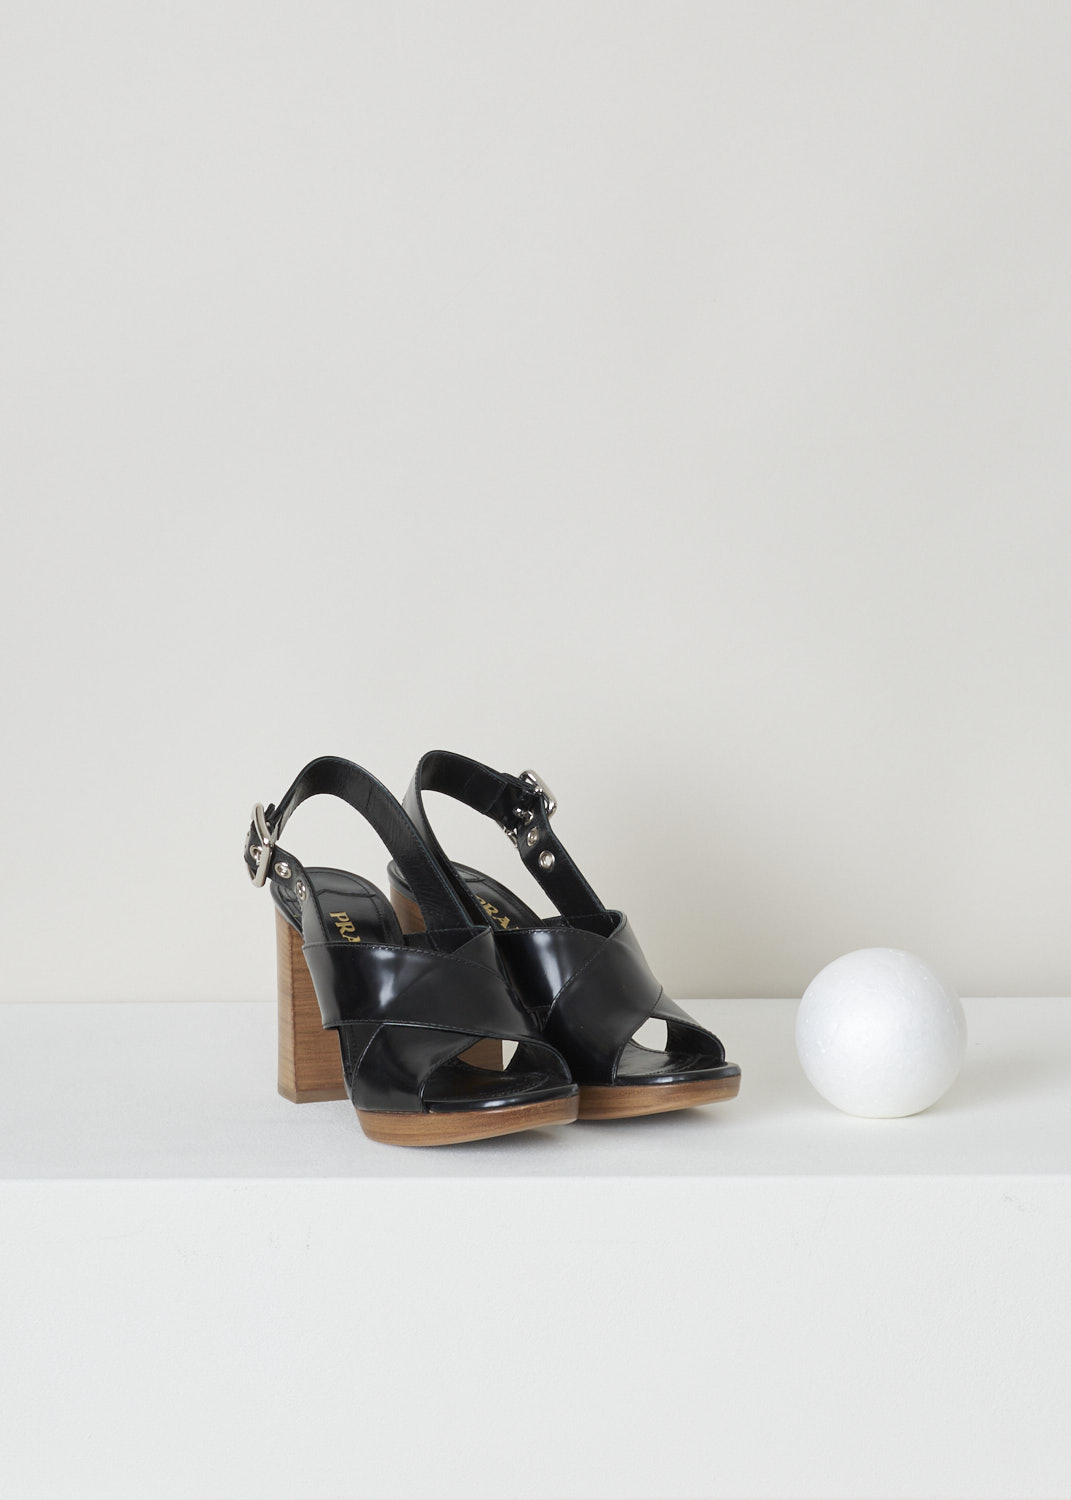 Prada, Black cross-strap slingback, spazzolato_1X543F_nero_F0002, black brown, front, Black platform slingbacks, comes with a cross toe strap, and a silver-tone buckle as your fastening option. The chunky heel and platform, are both coloured brown. 

Heel height: 9 cm / 3.54 inch. 
